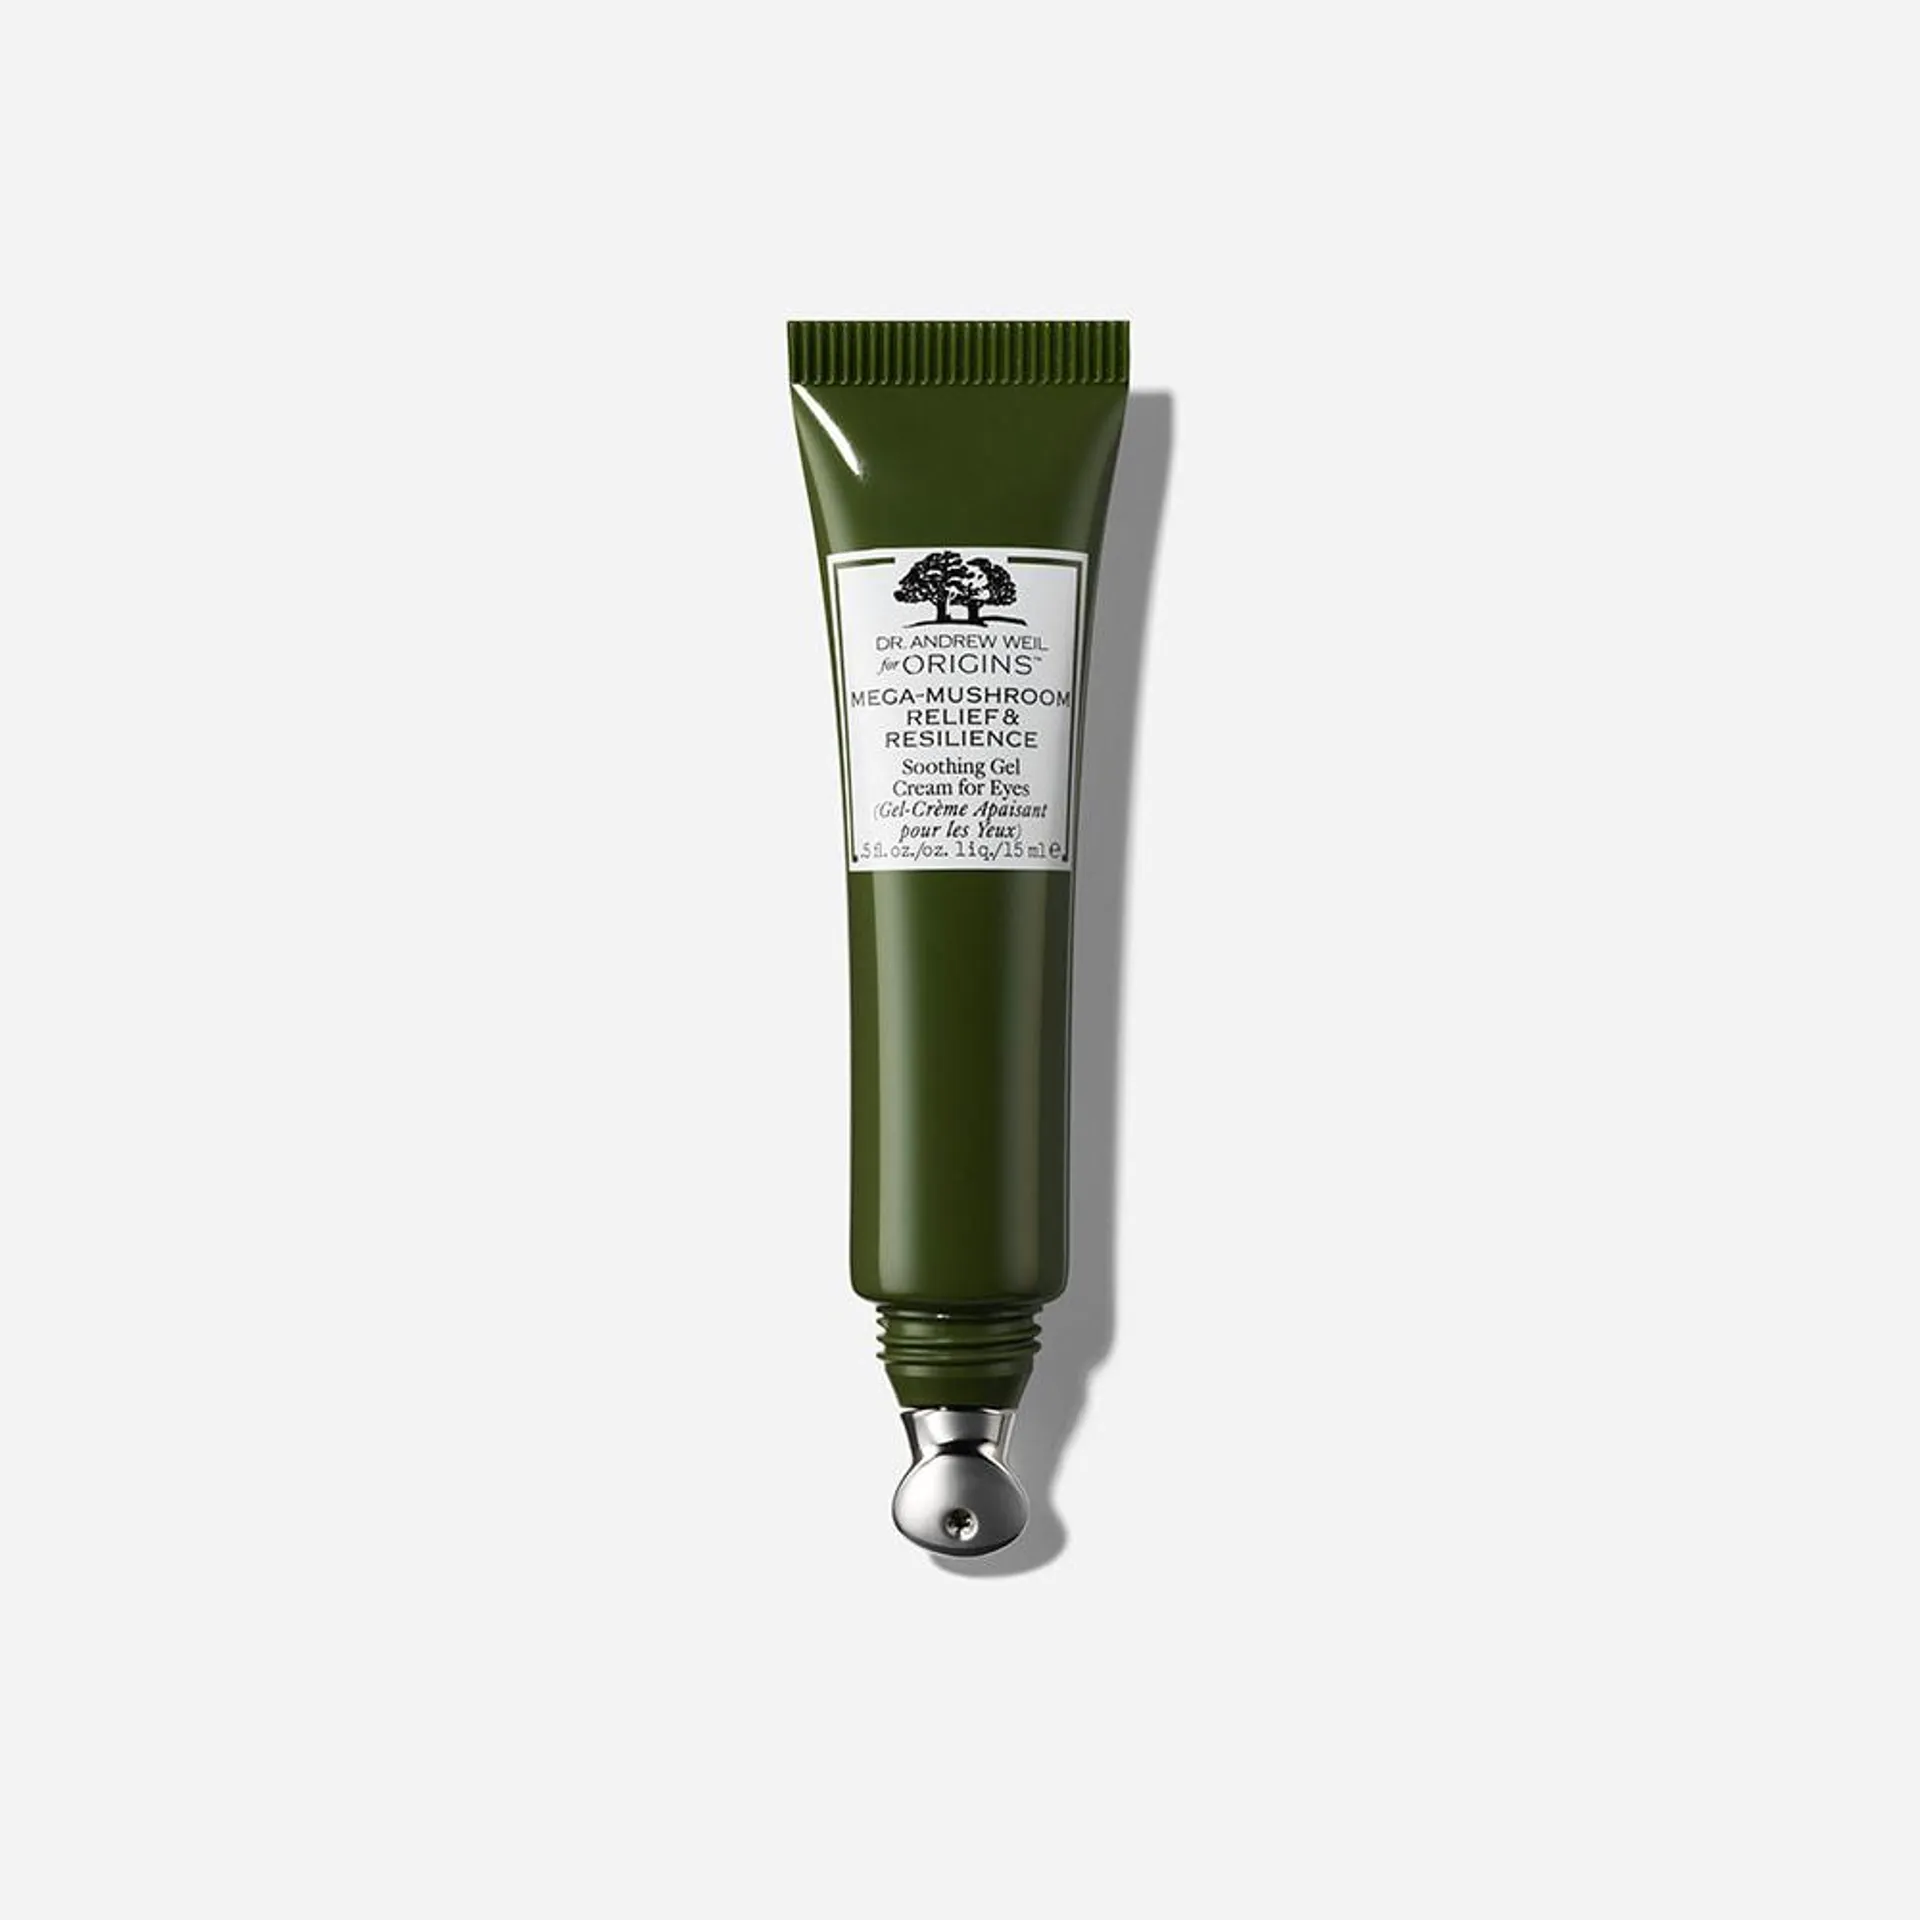 Dr. Andrew Weil for Origins™ Mega-Mushroom Relief & Resilience Soothing Gel Cream for Eyes